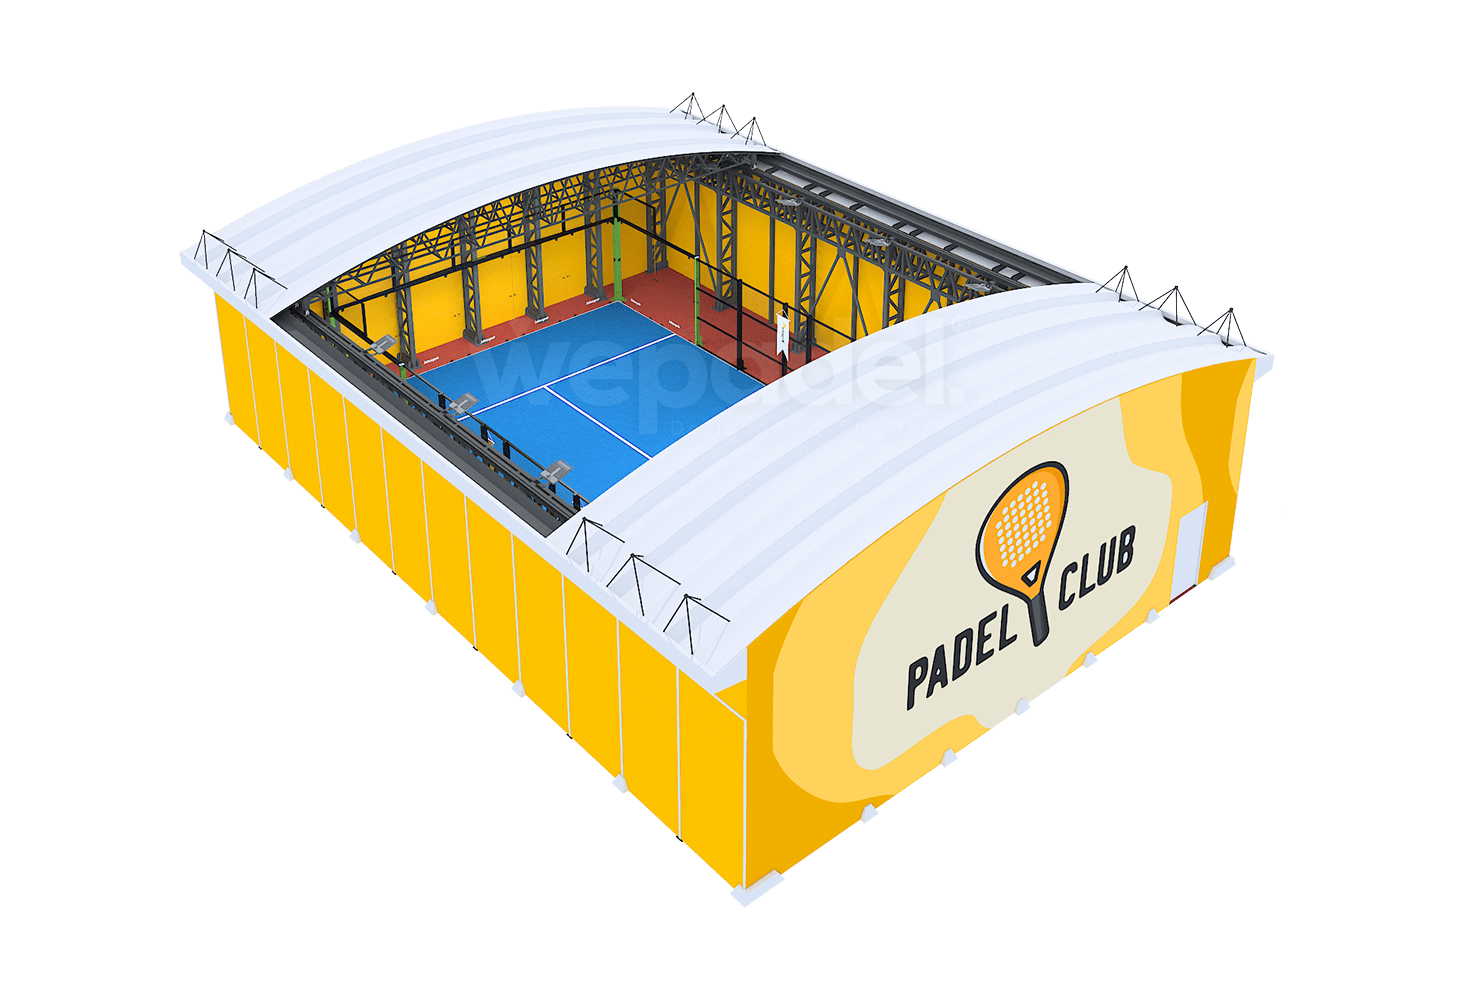 special-edition-padel-court-1